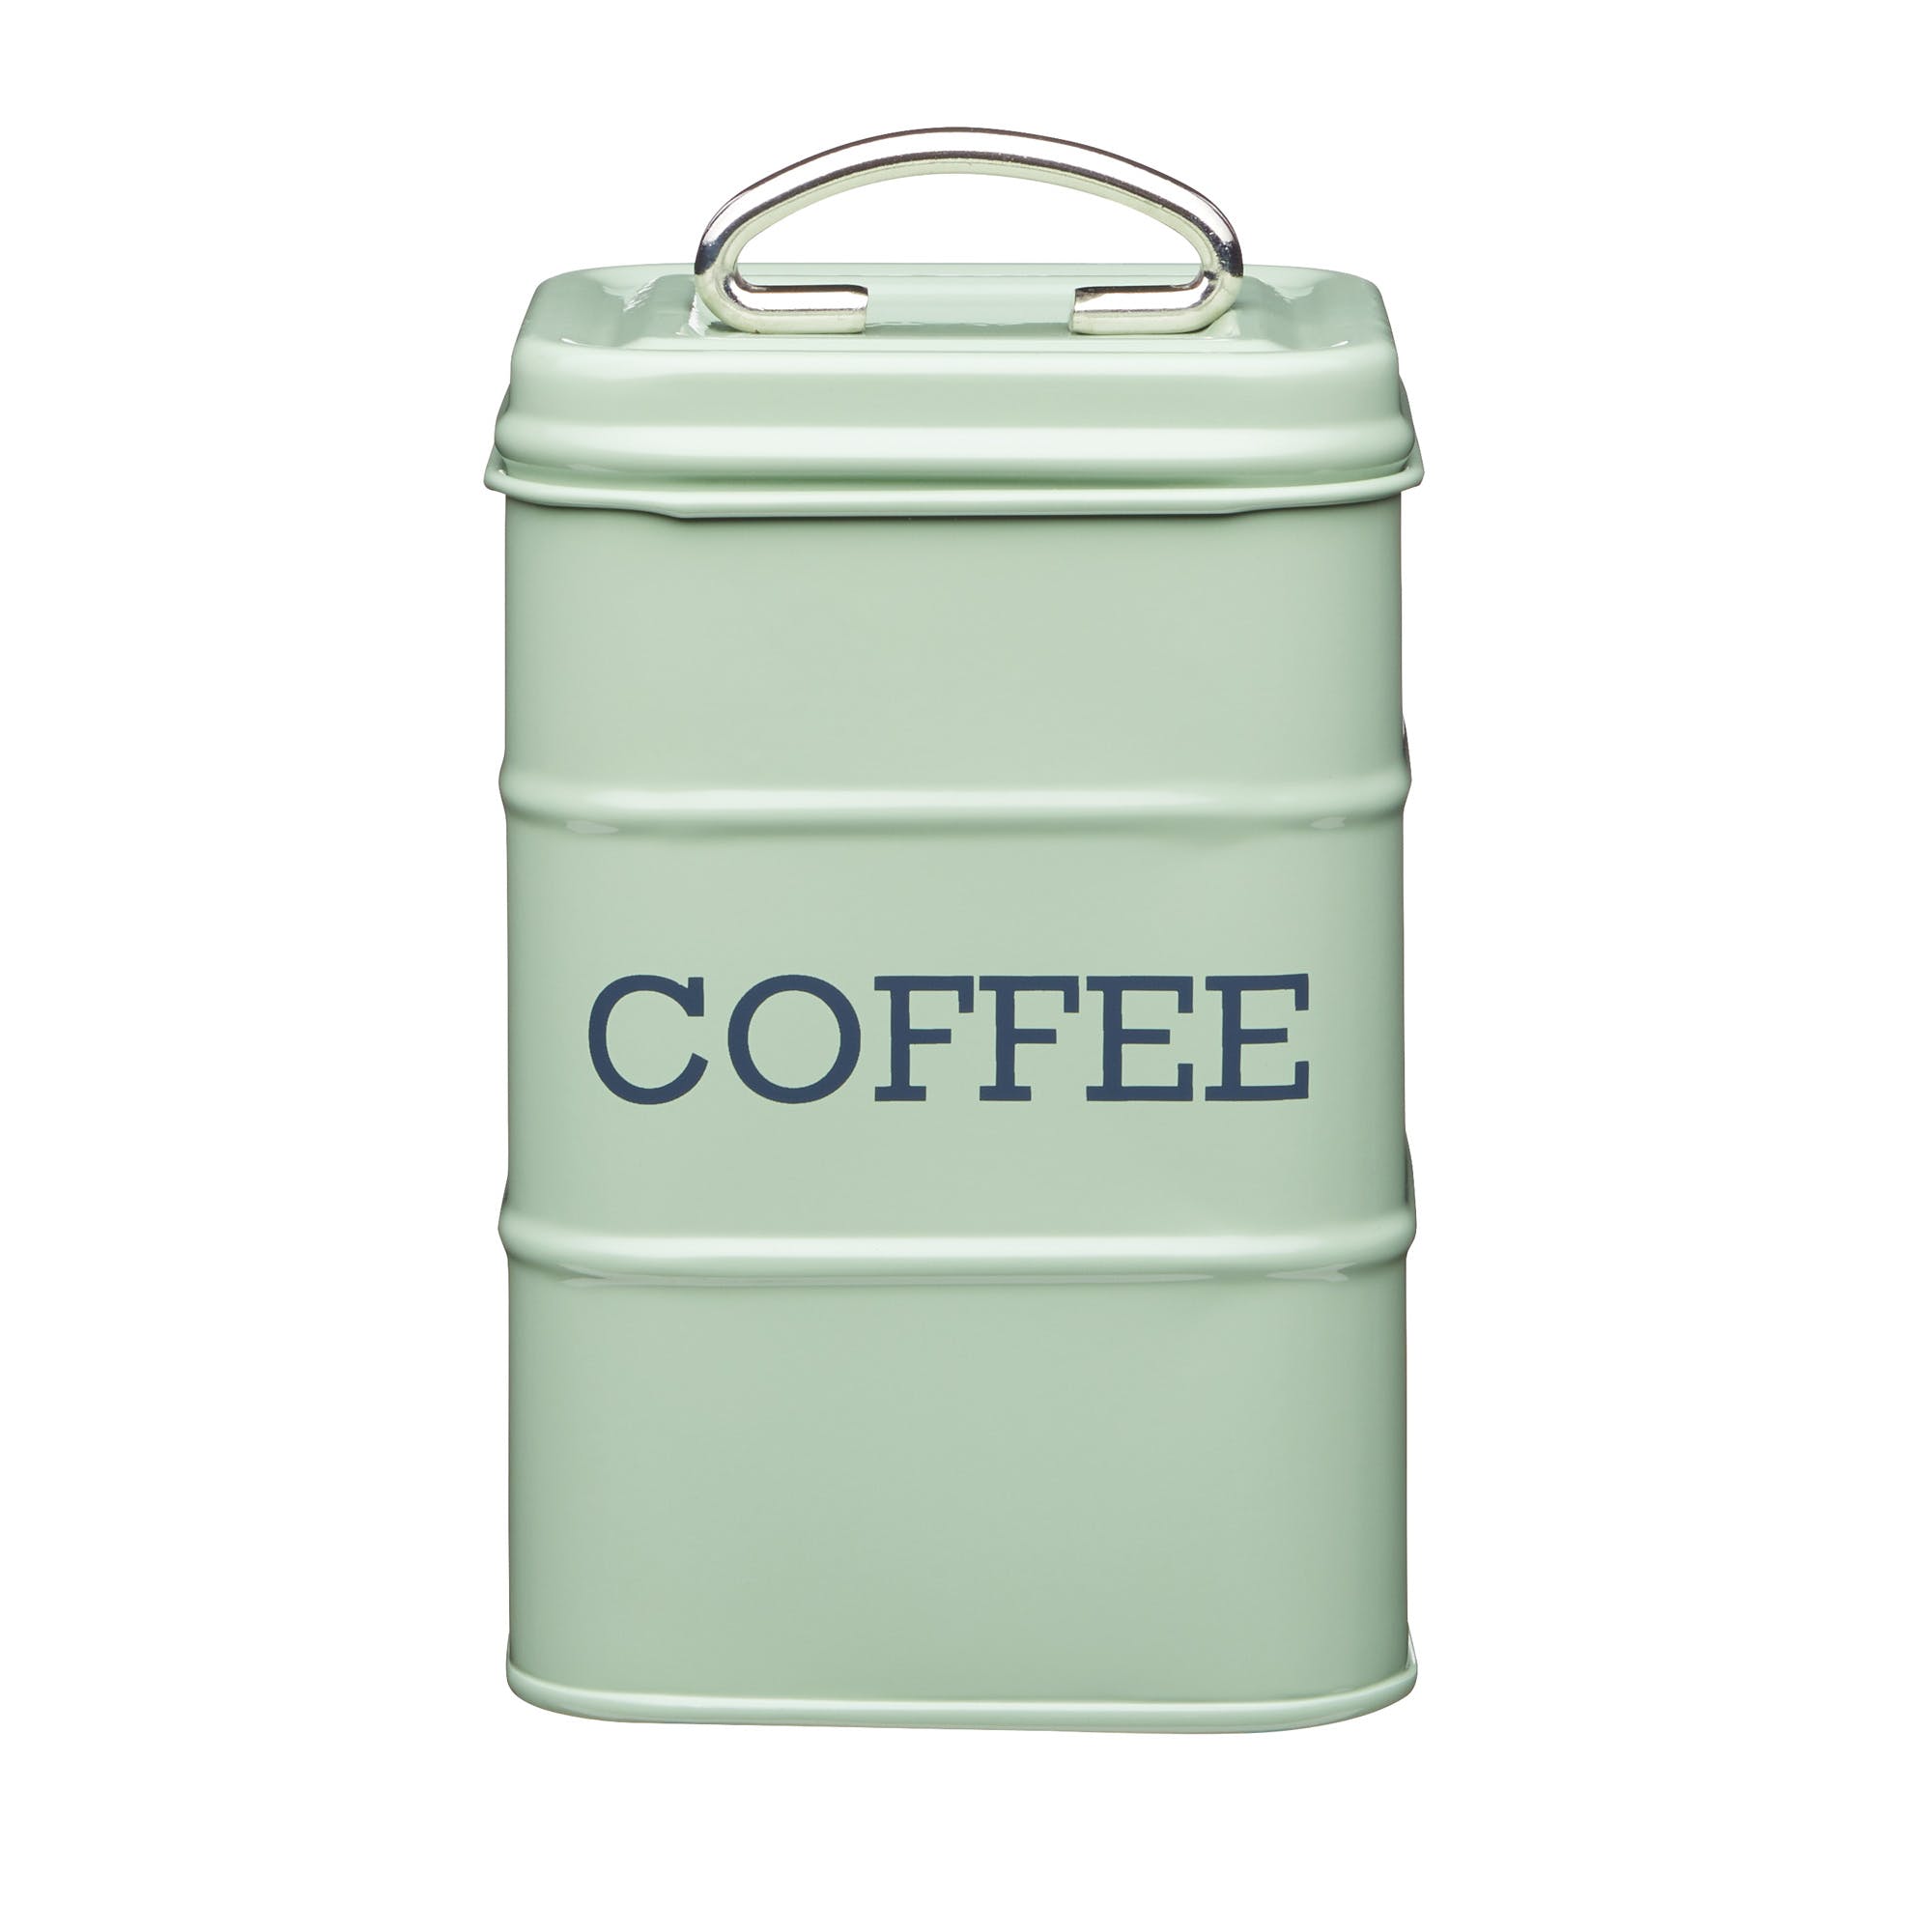 Living Nostalgia Coffee Storage Canister - English Sage Green - The Cooks Cupboard Ltd